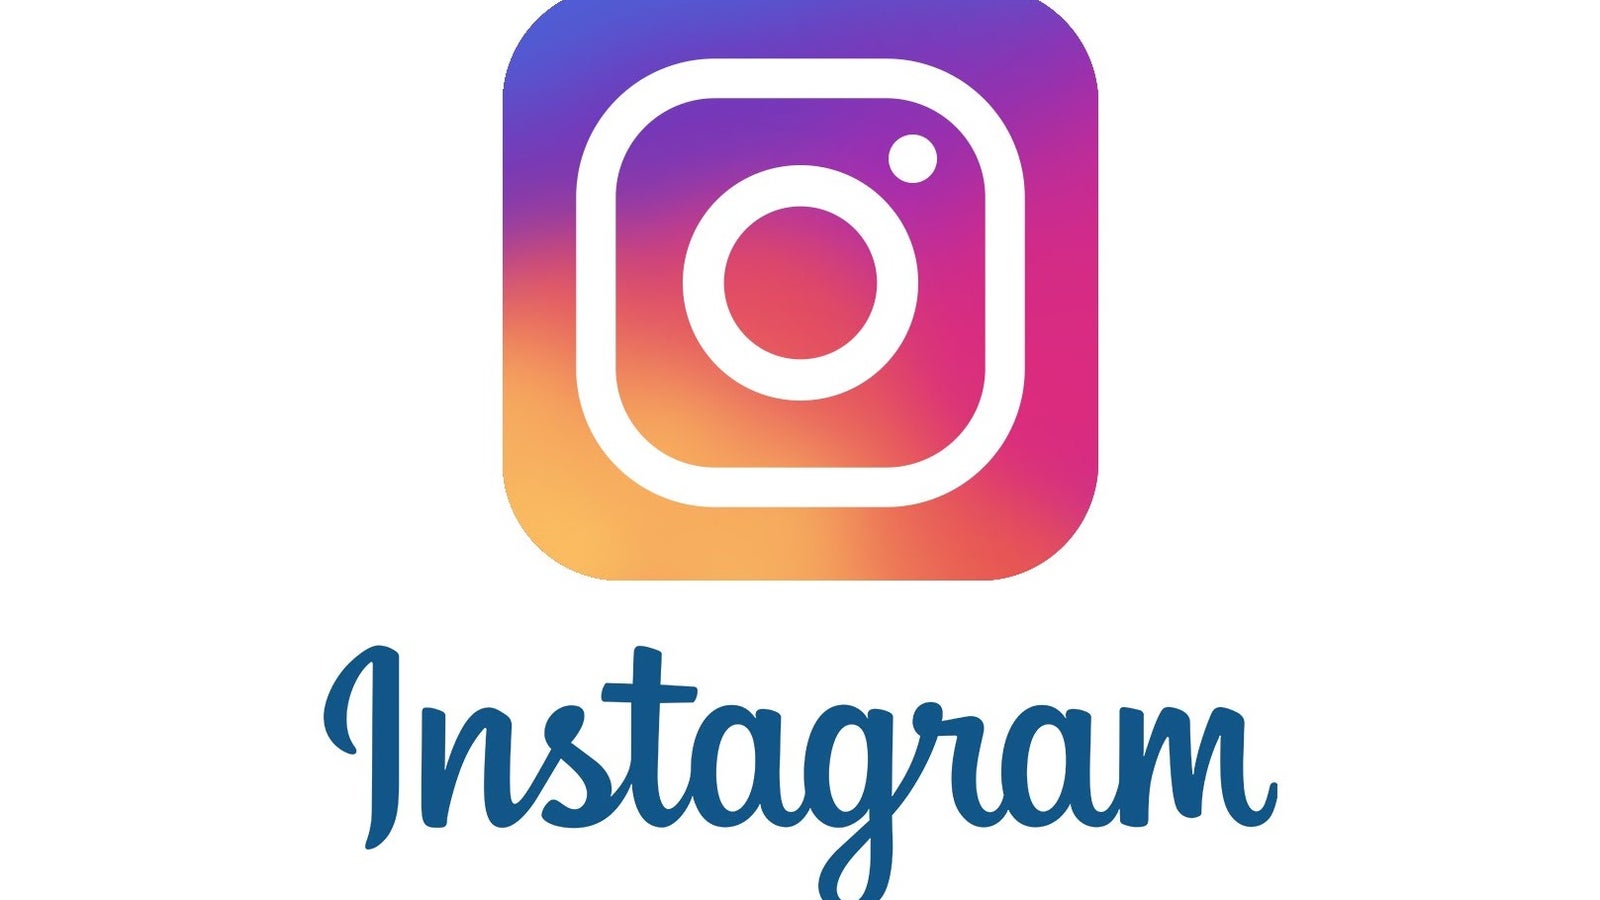 Instagram could soon launch an e-commerce app called IG Shop